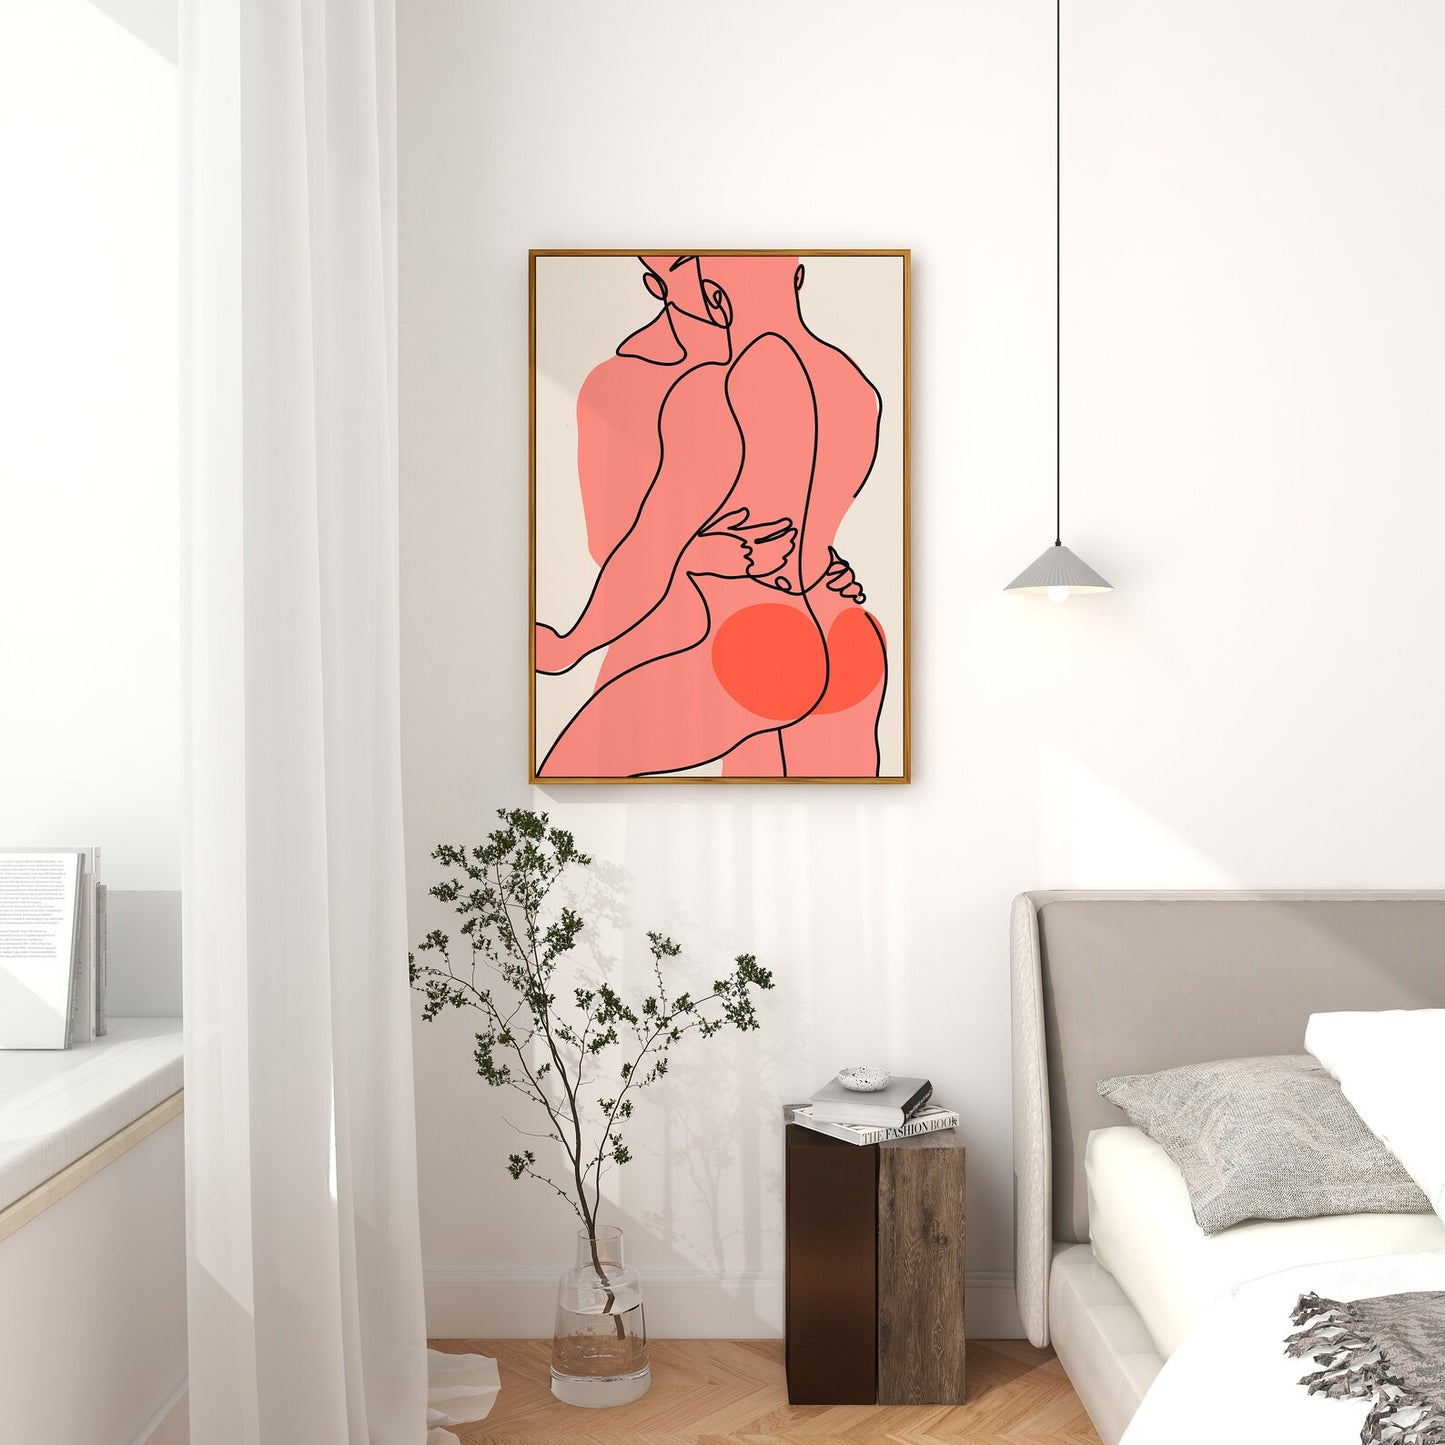 Gay Couple Abstract Nude Art Print, Gay Couple Wall Art, Gay Couple Gift, Nude Male, Line Drawing, Male Figure Sketch, Beige Pink Red